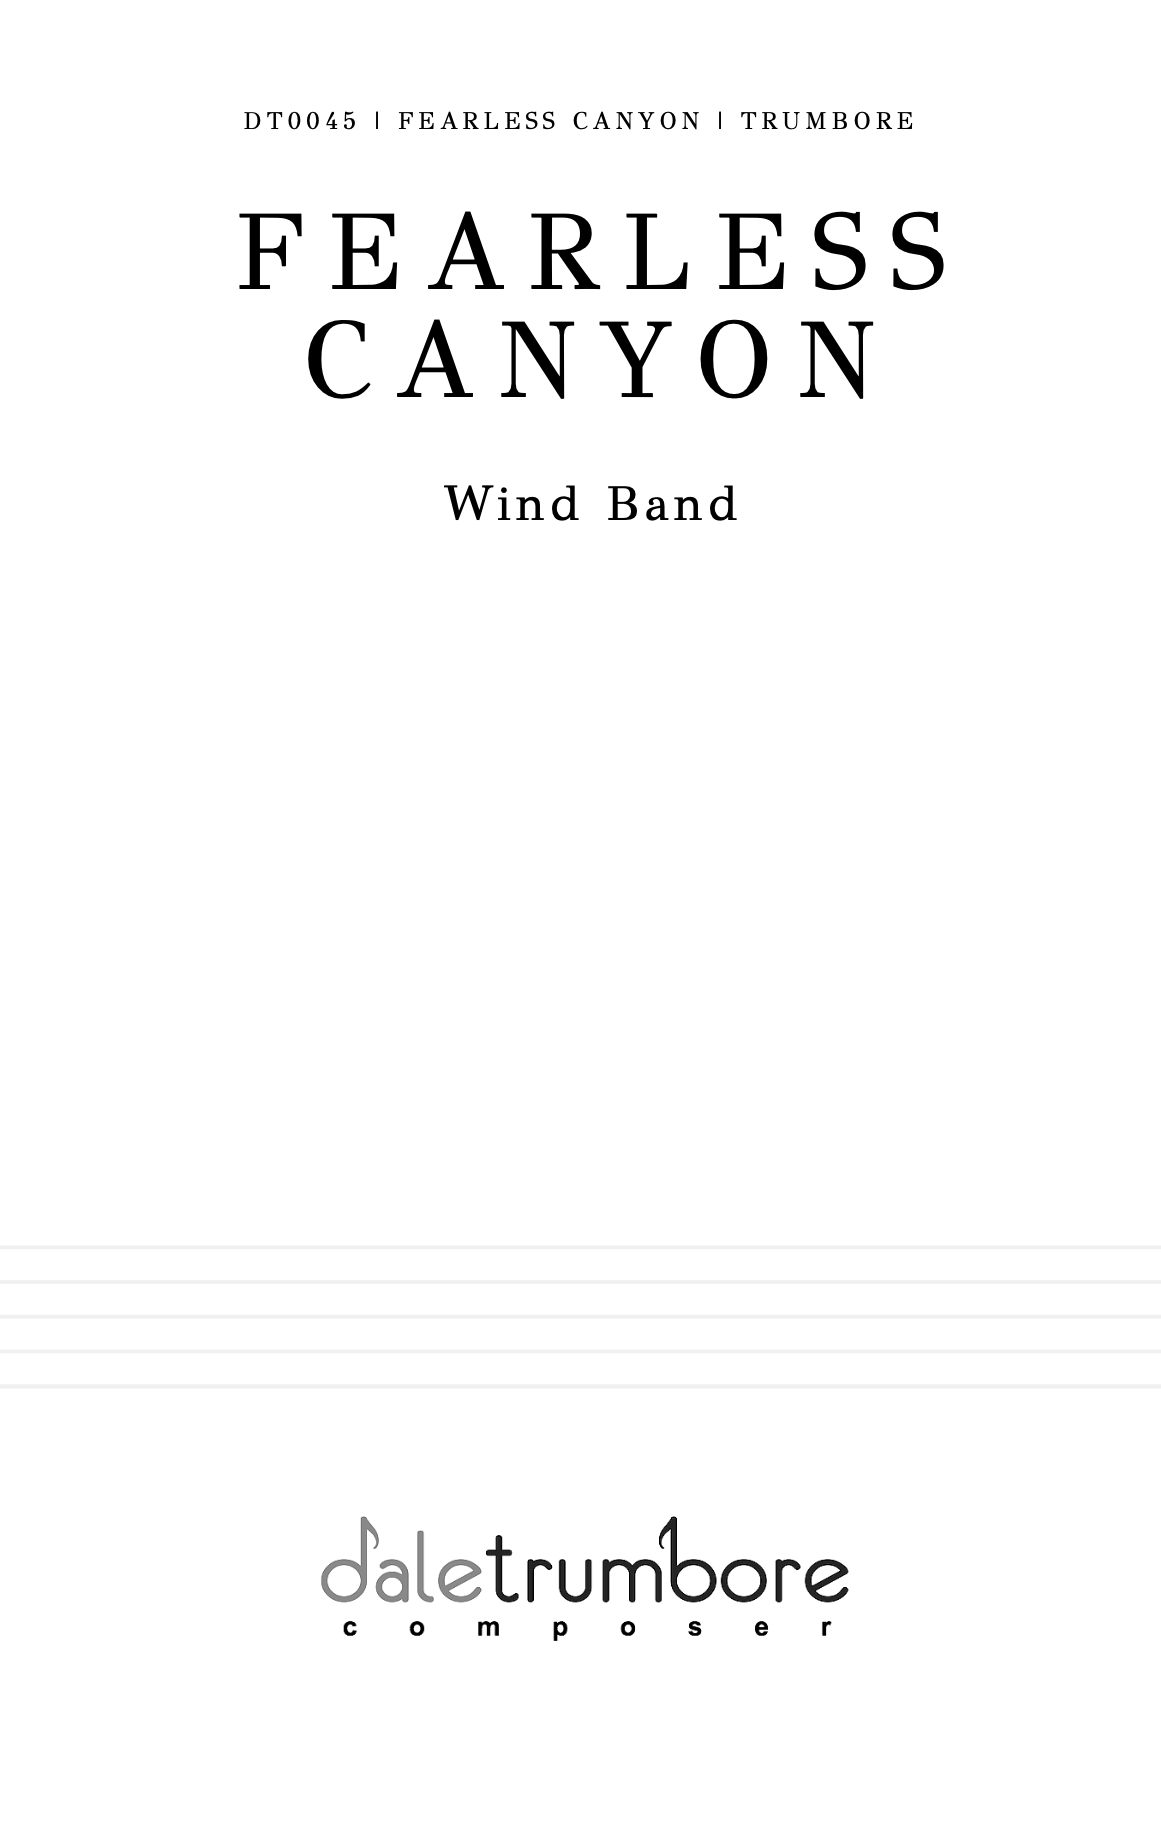 Fearless Canyon (Score Only) by Dale Trumbore